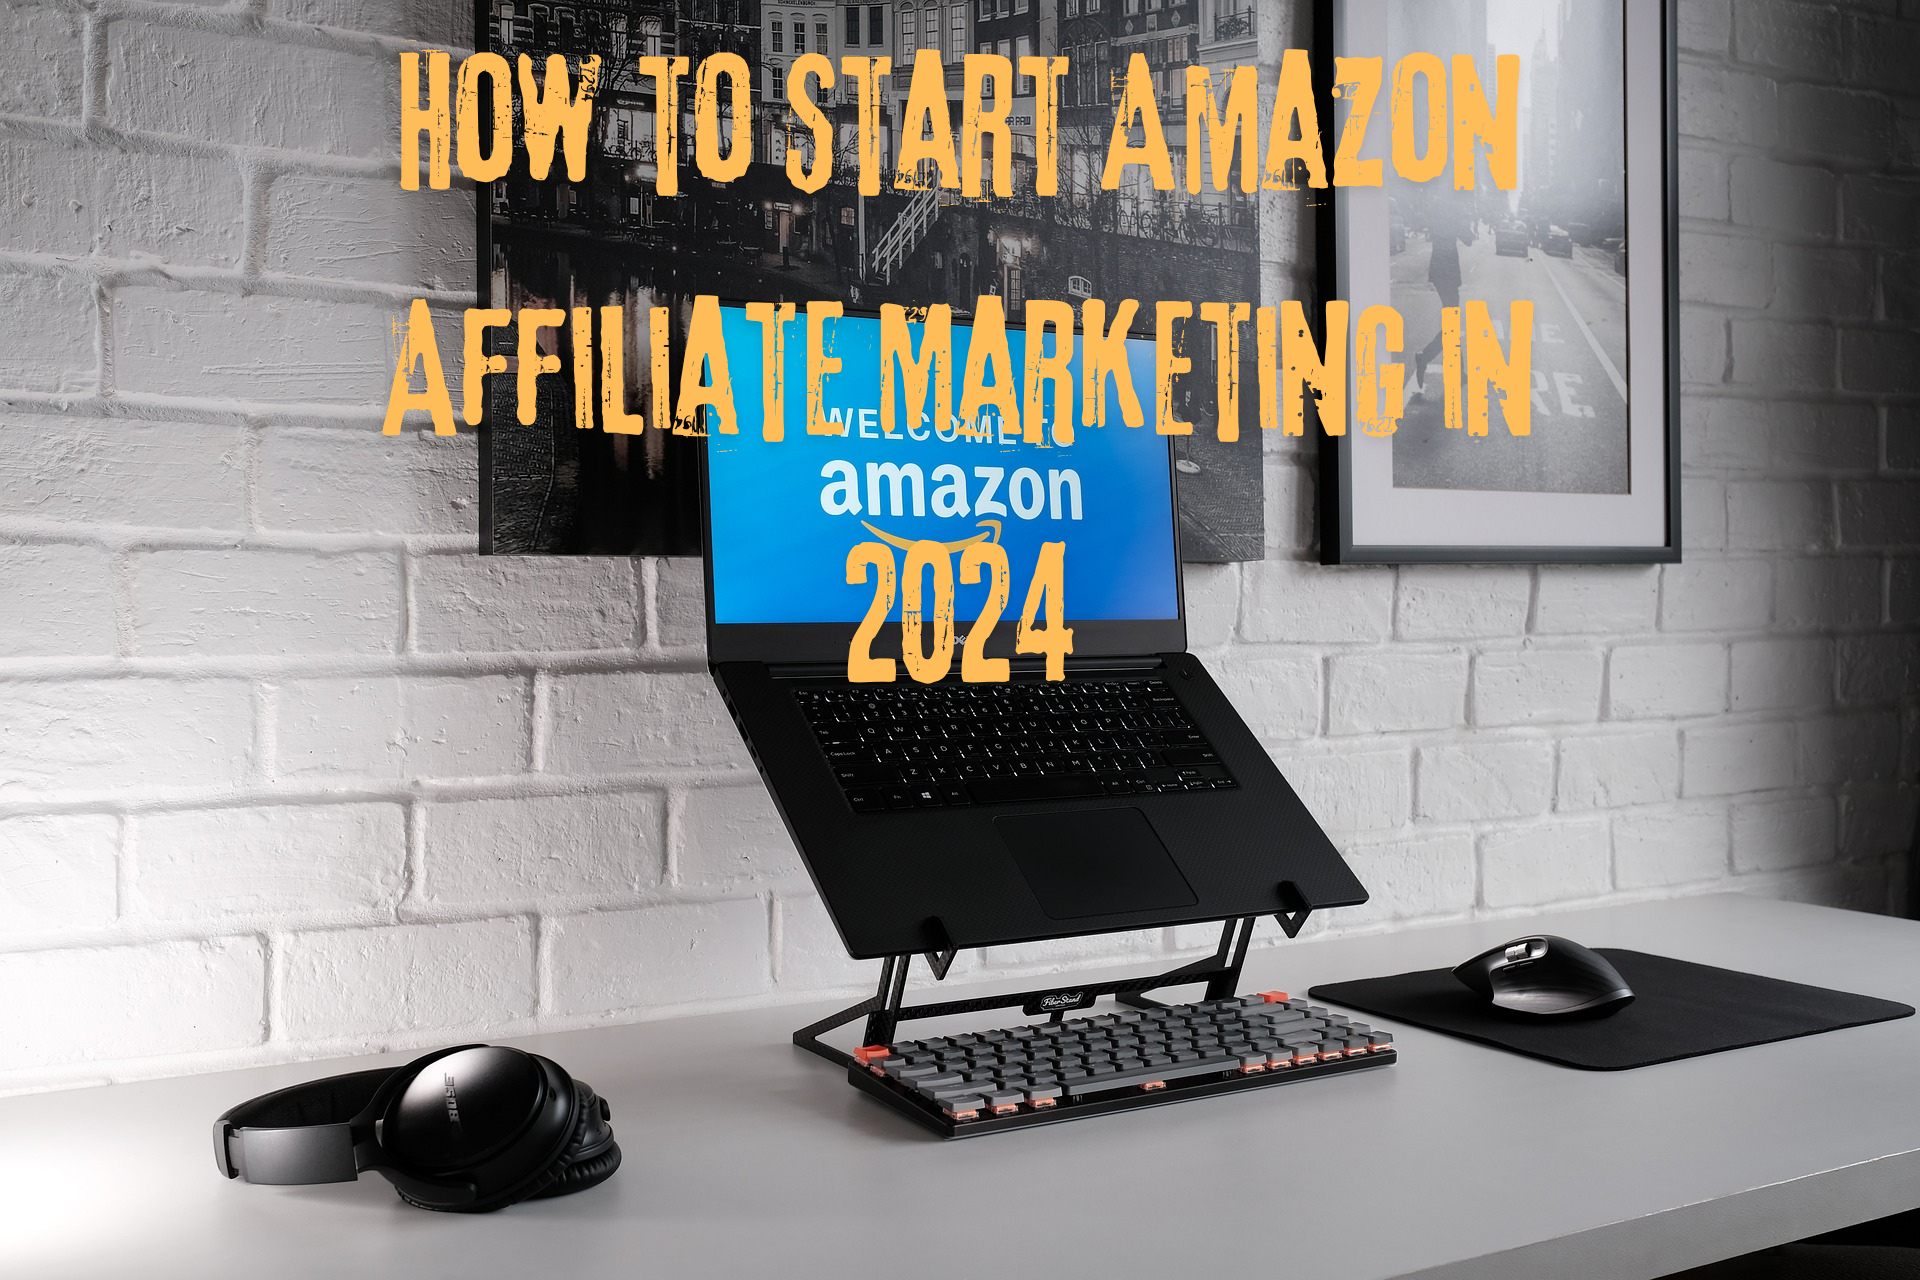 How to Start Amazon Affiliate Marketing in 2024: A Step-by-Step Guide